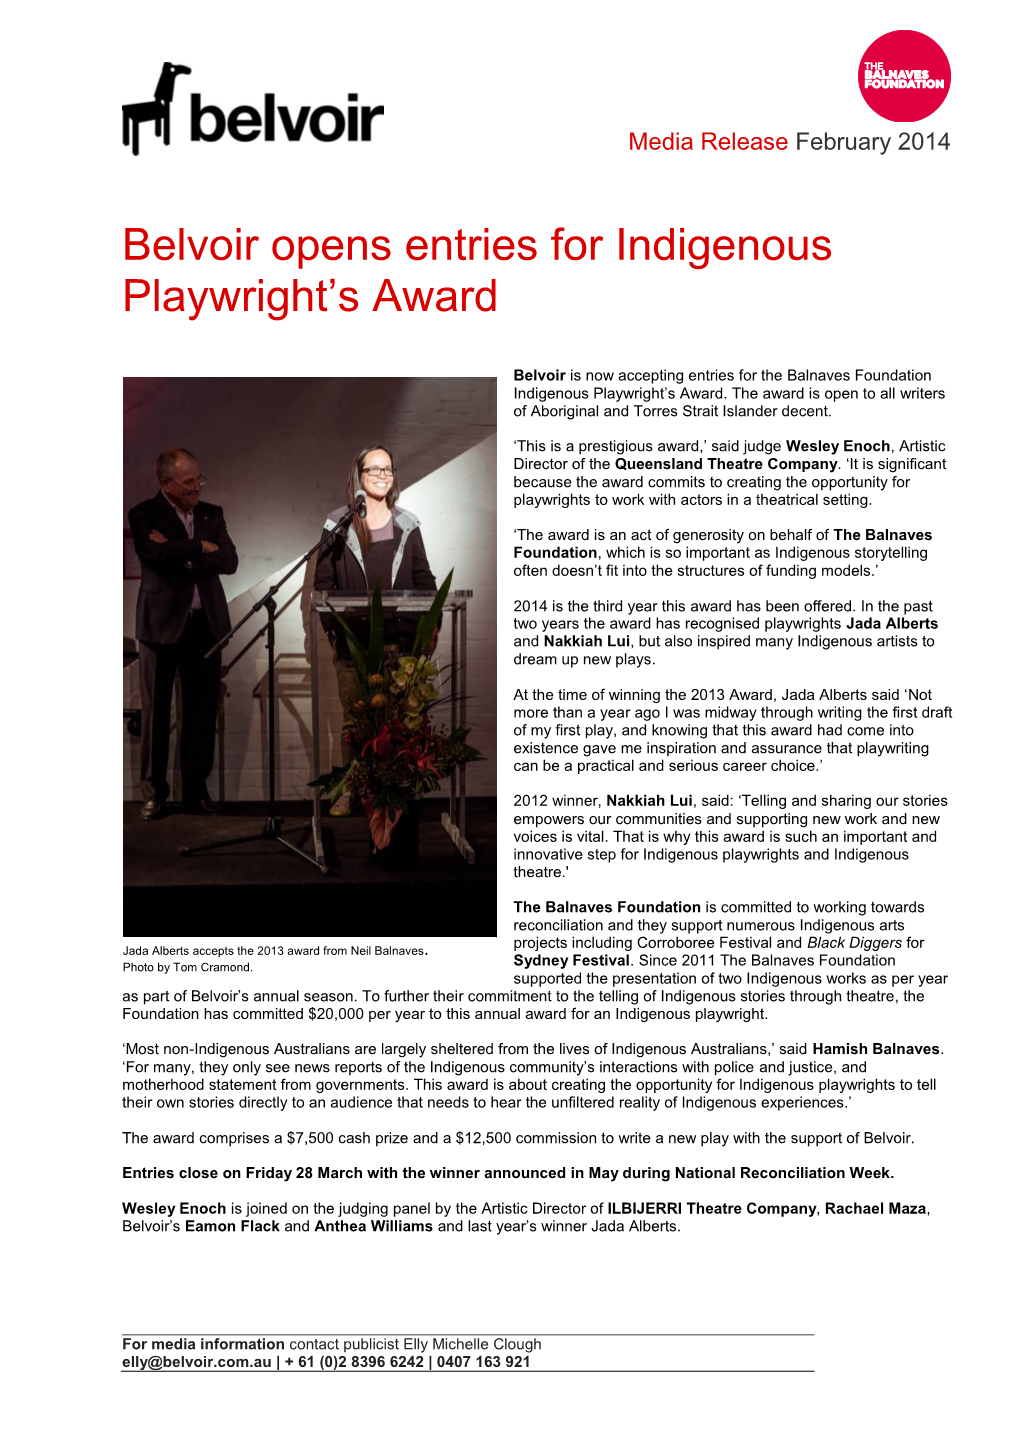 Belvoir Opens Entries for Indigenous Playwright's Award